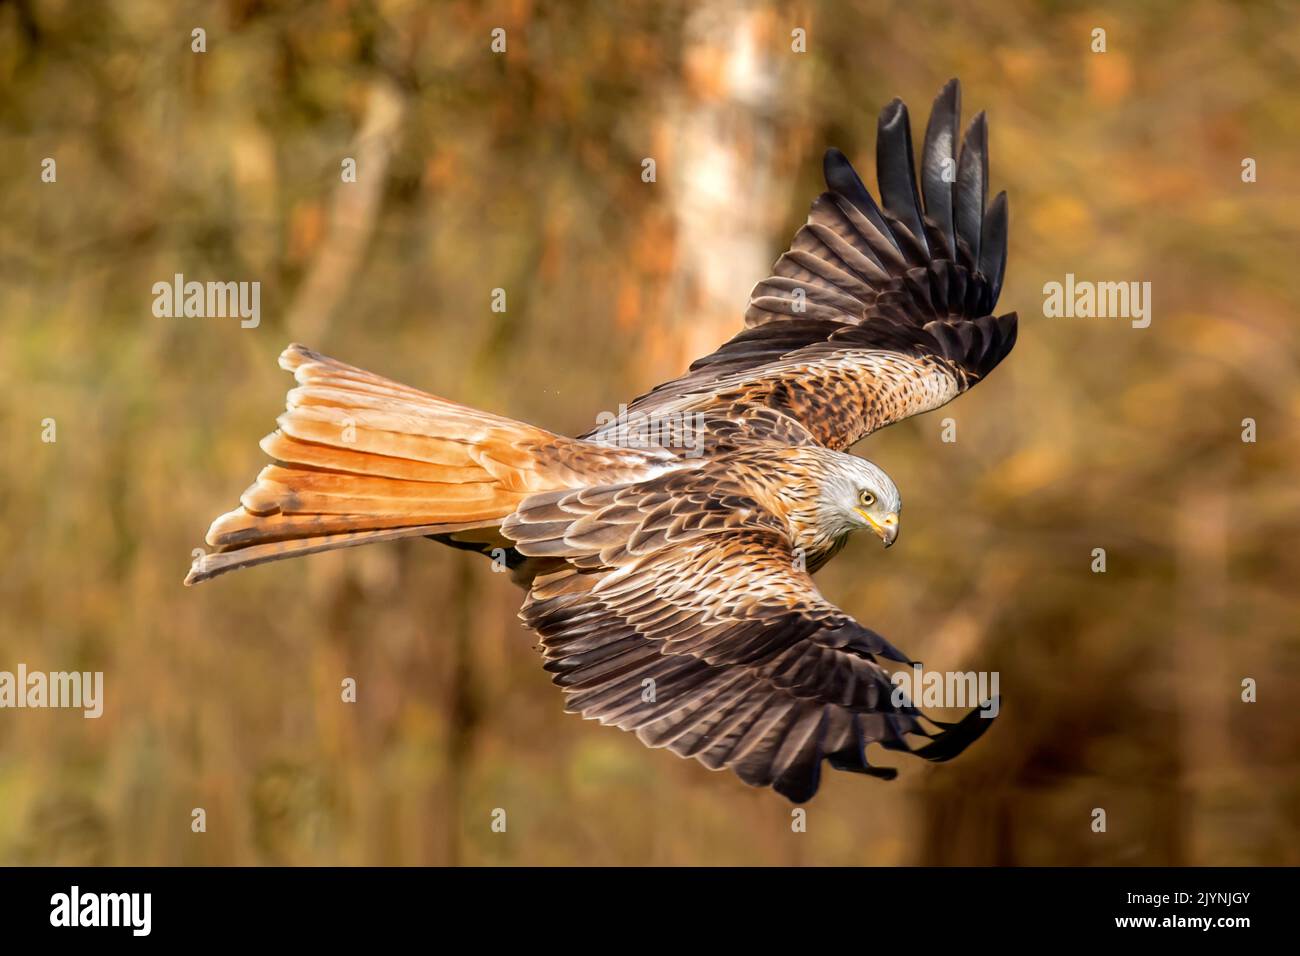 Red kite (Milvus milvus) in flight seen from above in winter, clearing on the edge of a forest, near Toul, Lorraine, France Stock Photo